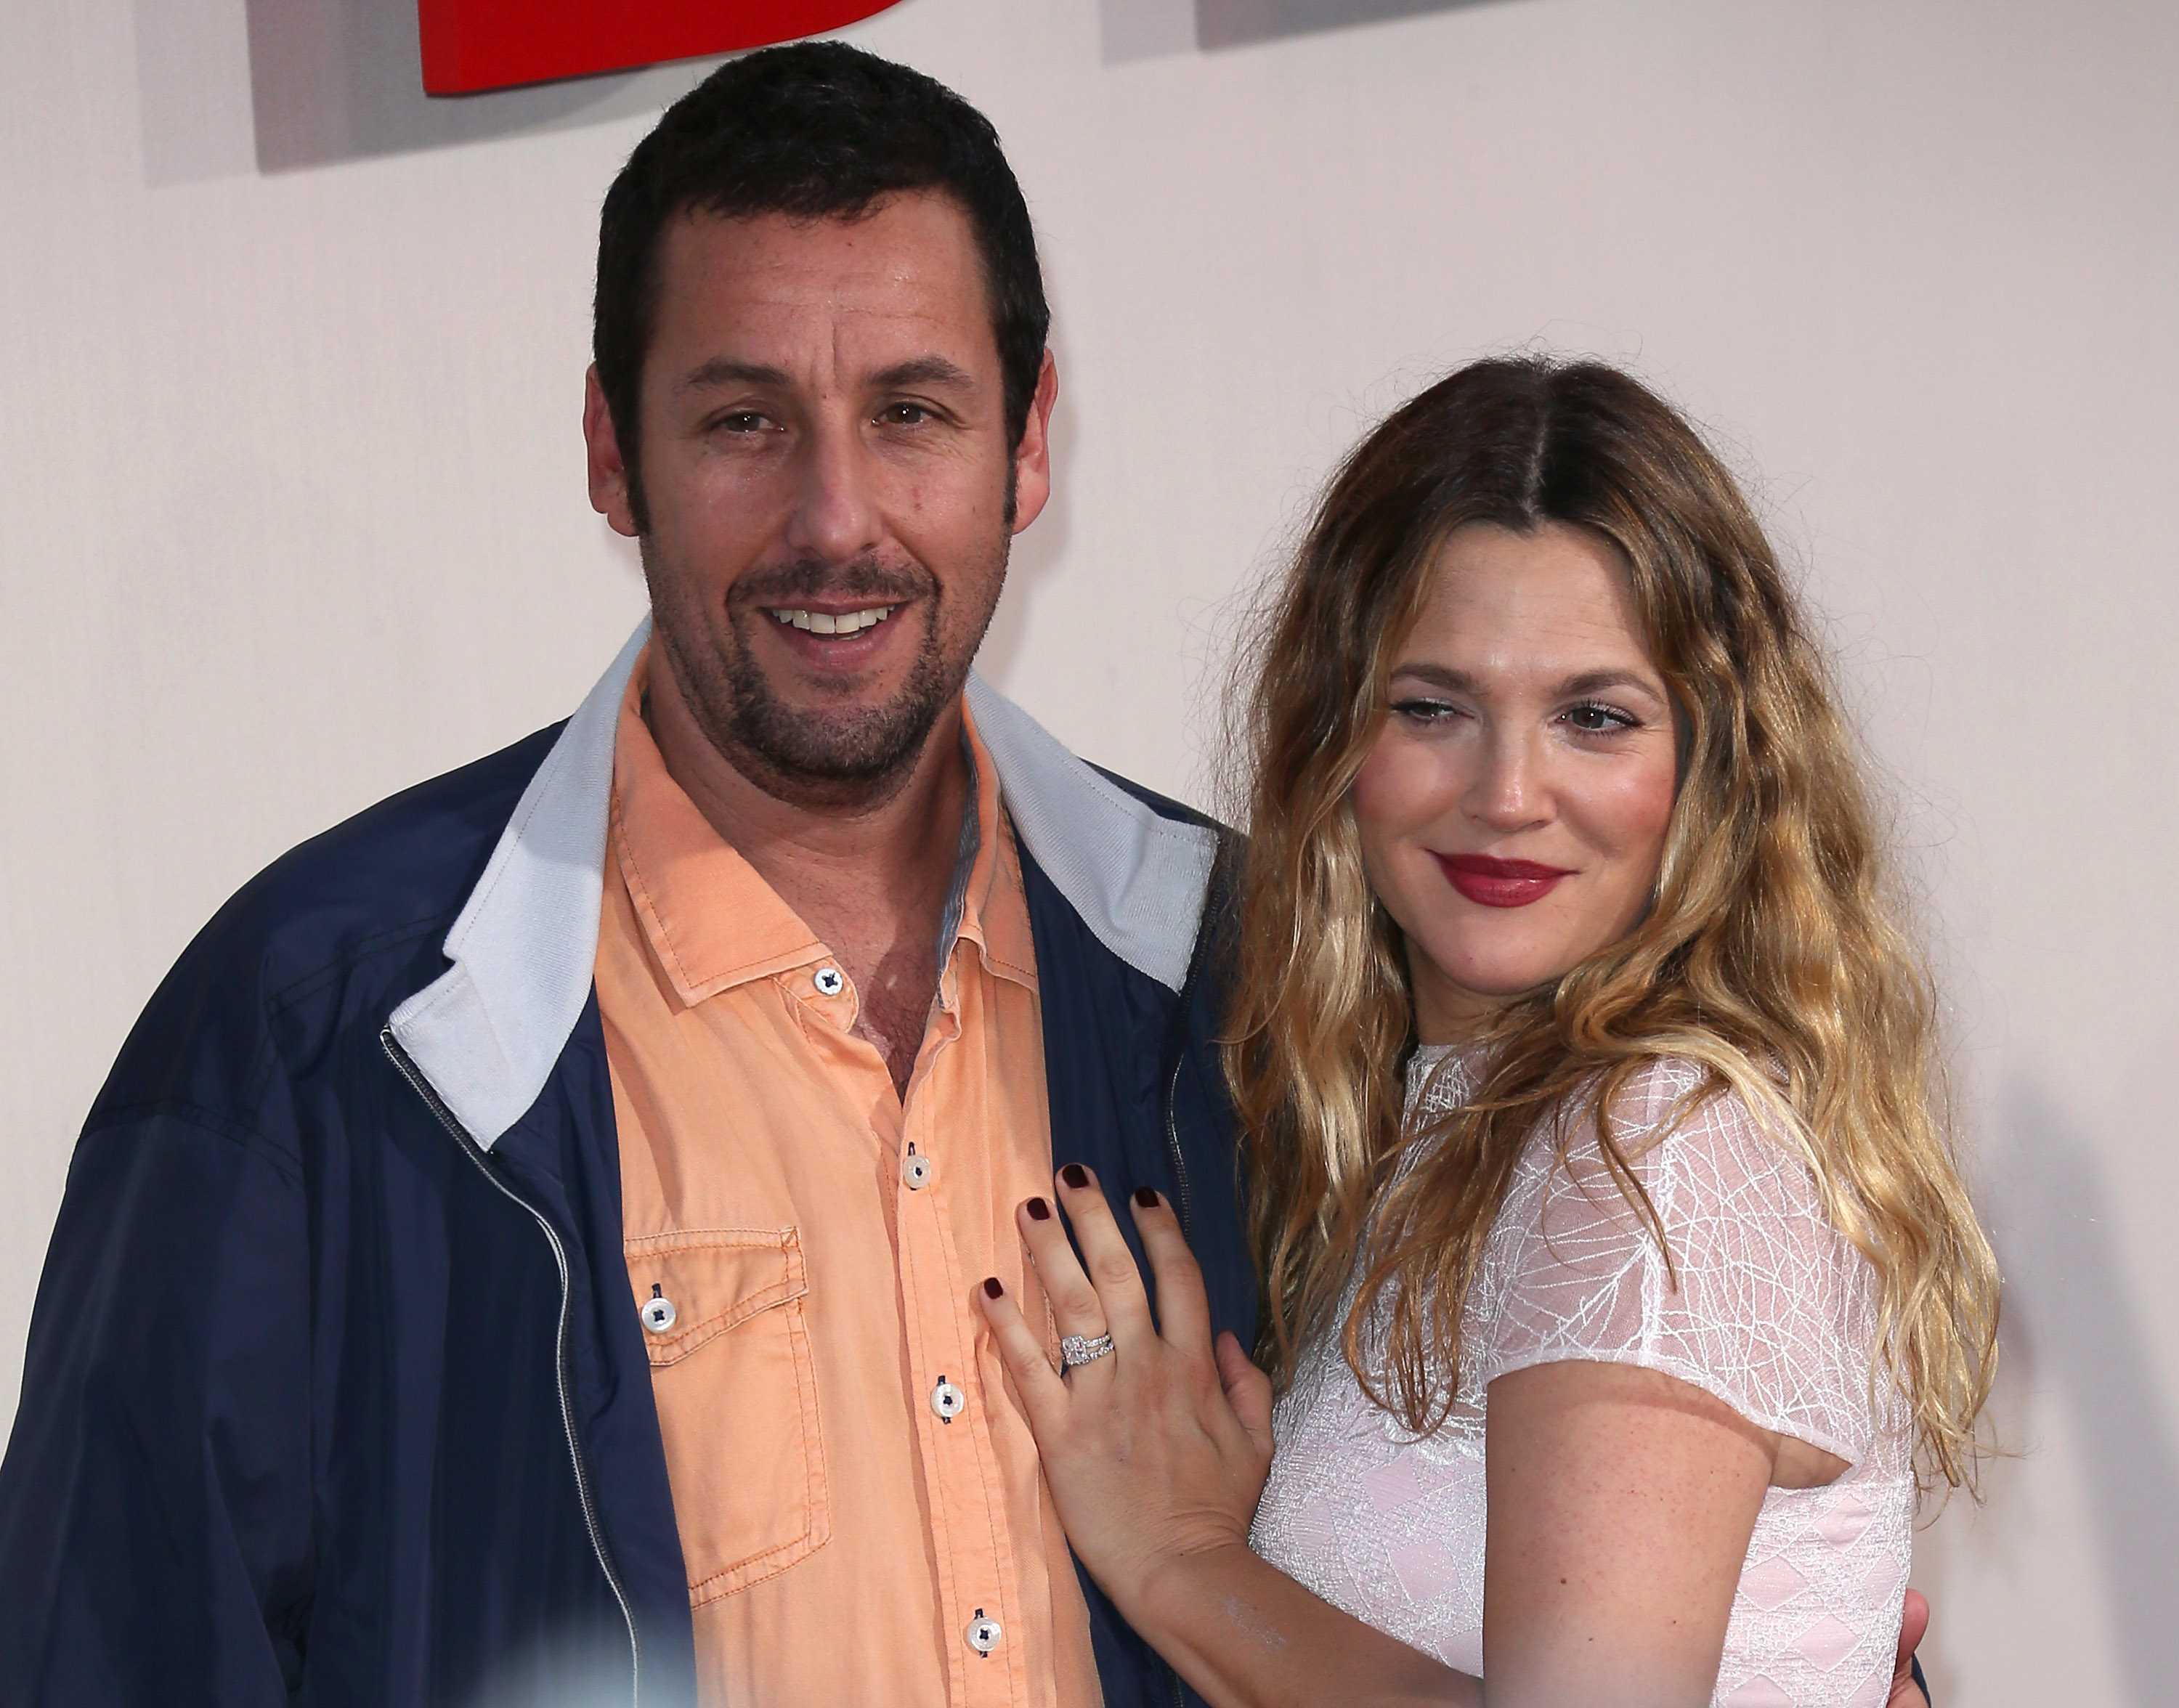 Actors Adam Sandler and Drew Barrymore attend the Los Angeles premiere of "Blended" at the TCL Chinese Theatre on May 21, 2014 in Hollywood, California. (David Livingston—;Getty Images)